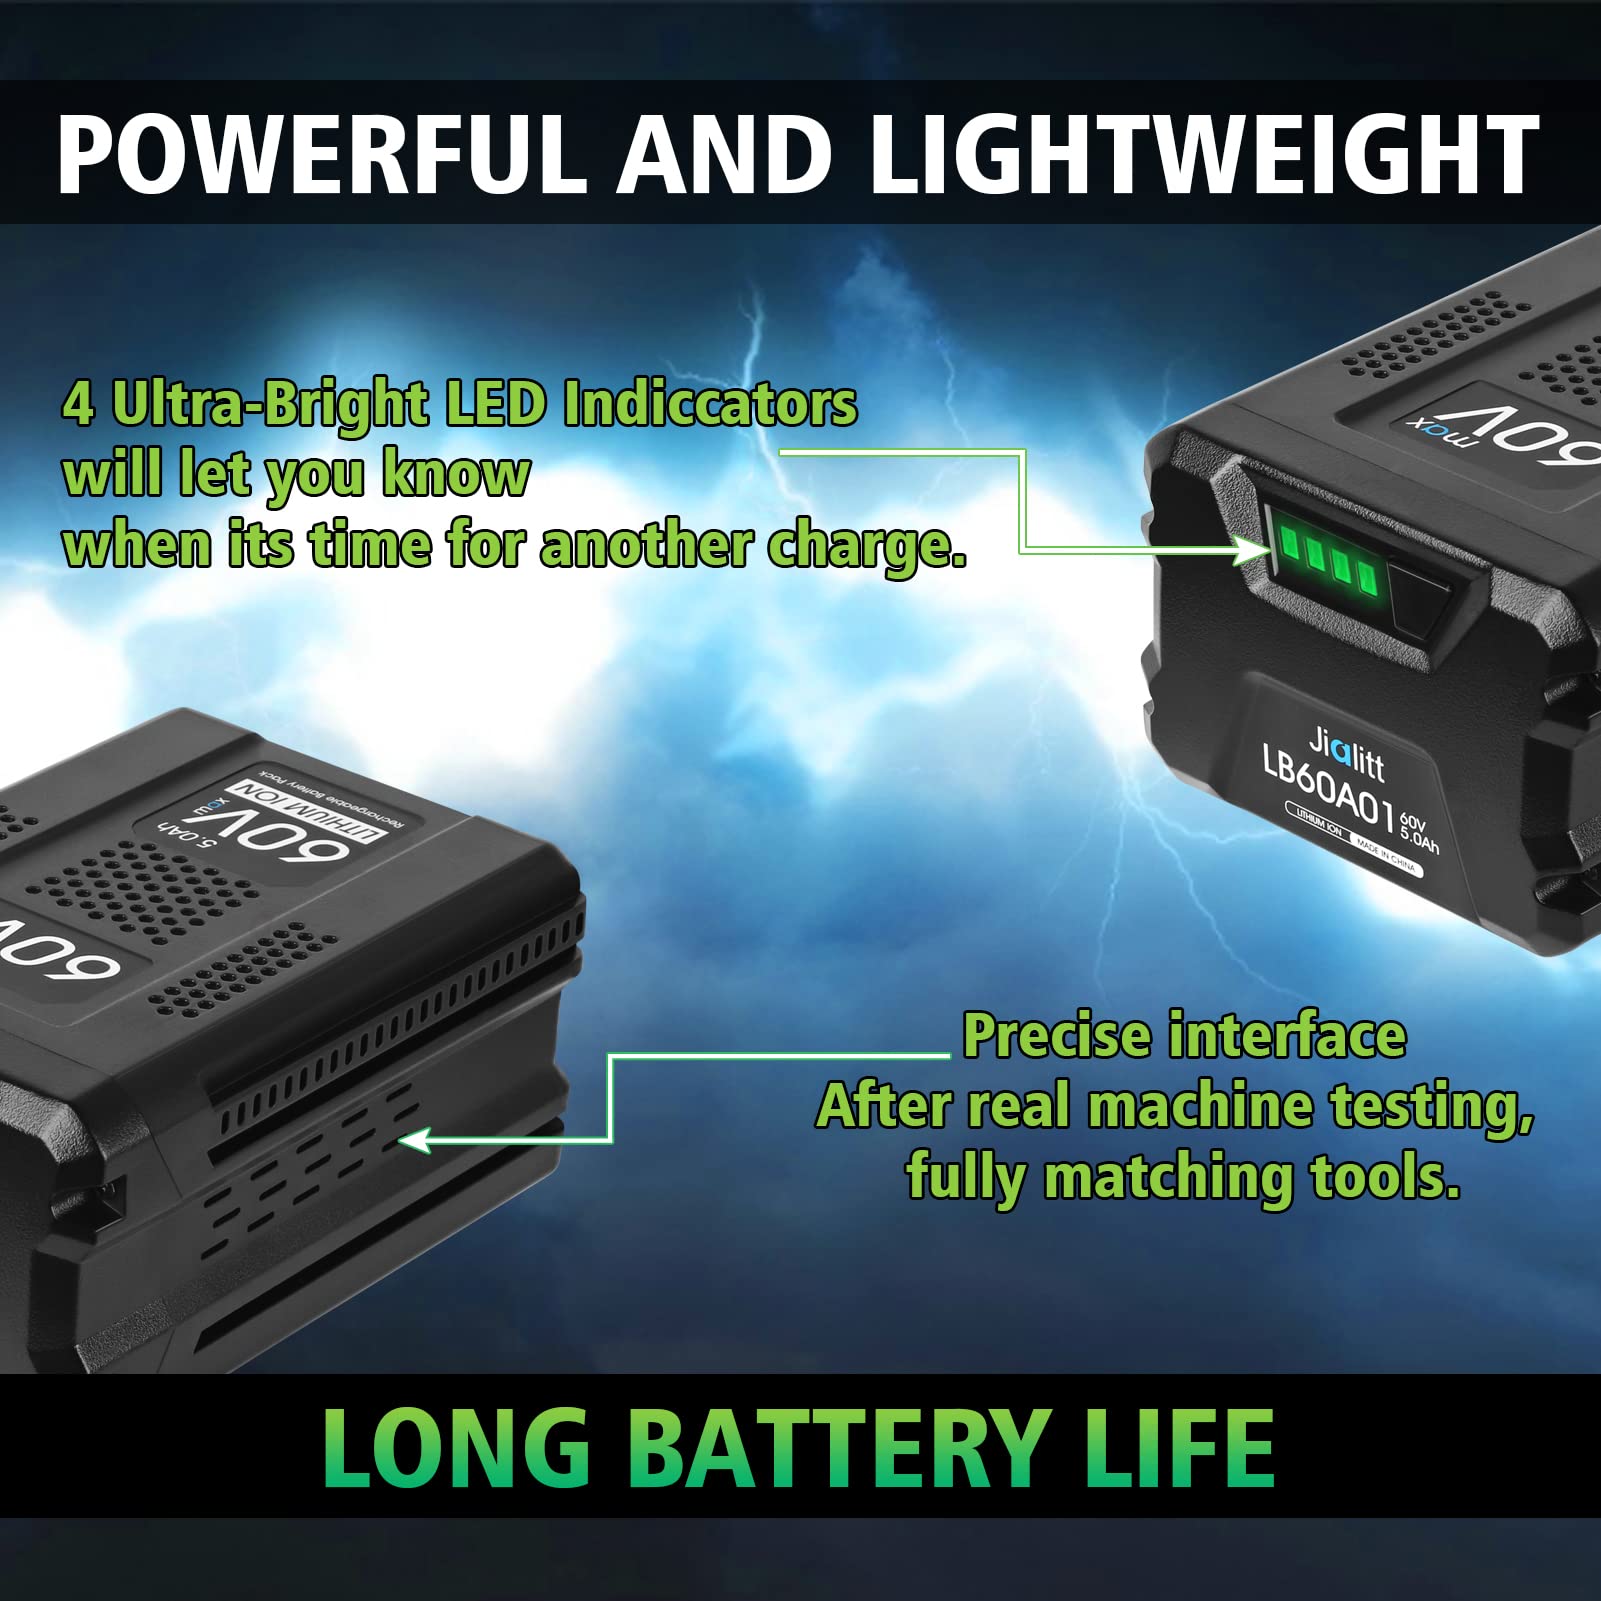 Jialitt 60V 5.0Ah Replacement for Greenworks Pro 60V Battery Max Lithium Ion LB60A00 LB60A01 LB60A02 LB60A03(Not for Kobalt&Powerworks)